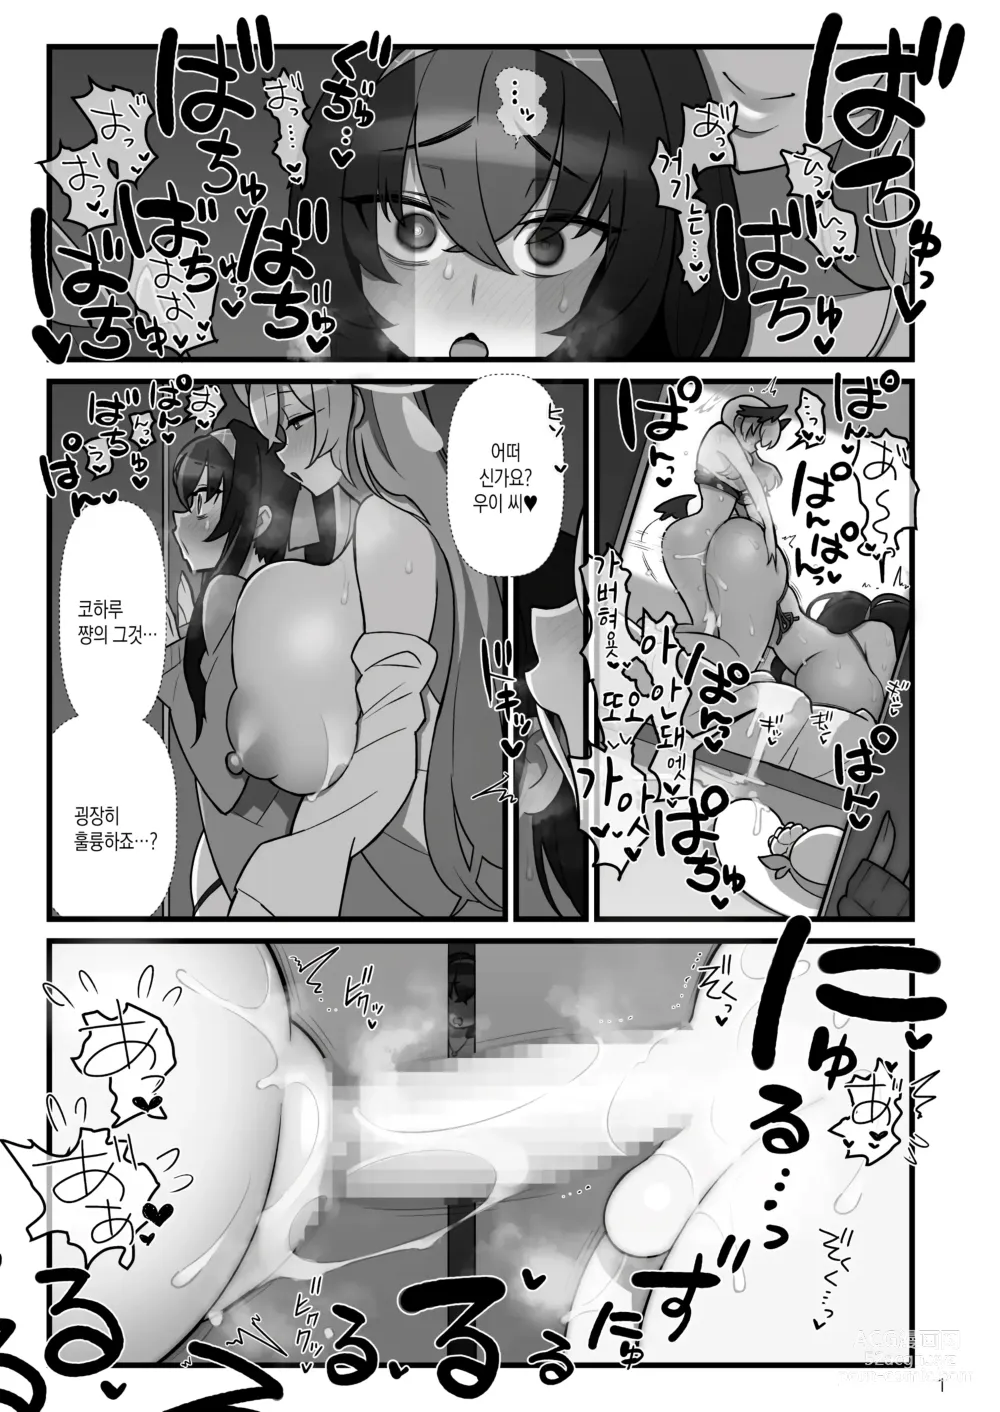 Page 2 of doujinshi 코하루 후타나루